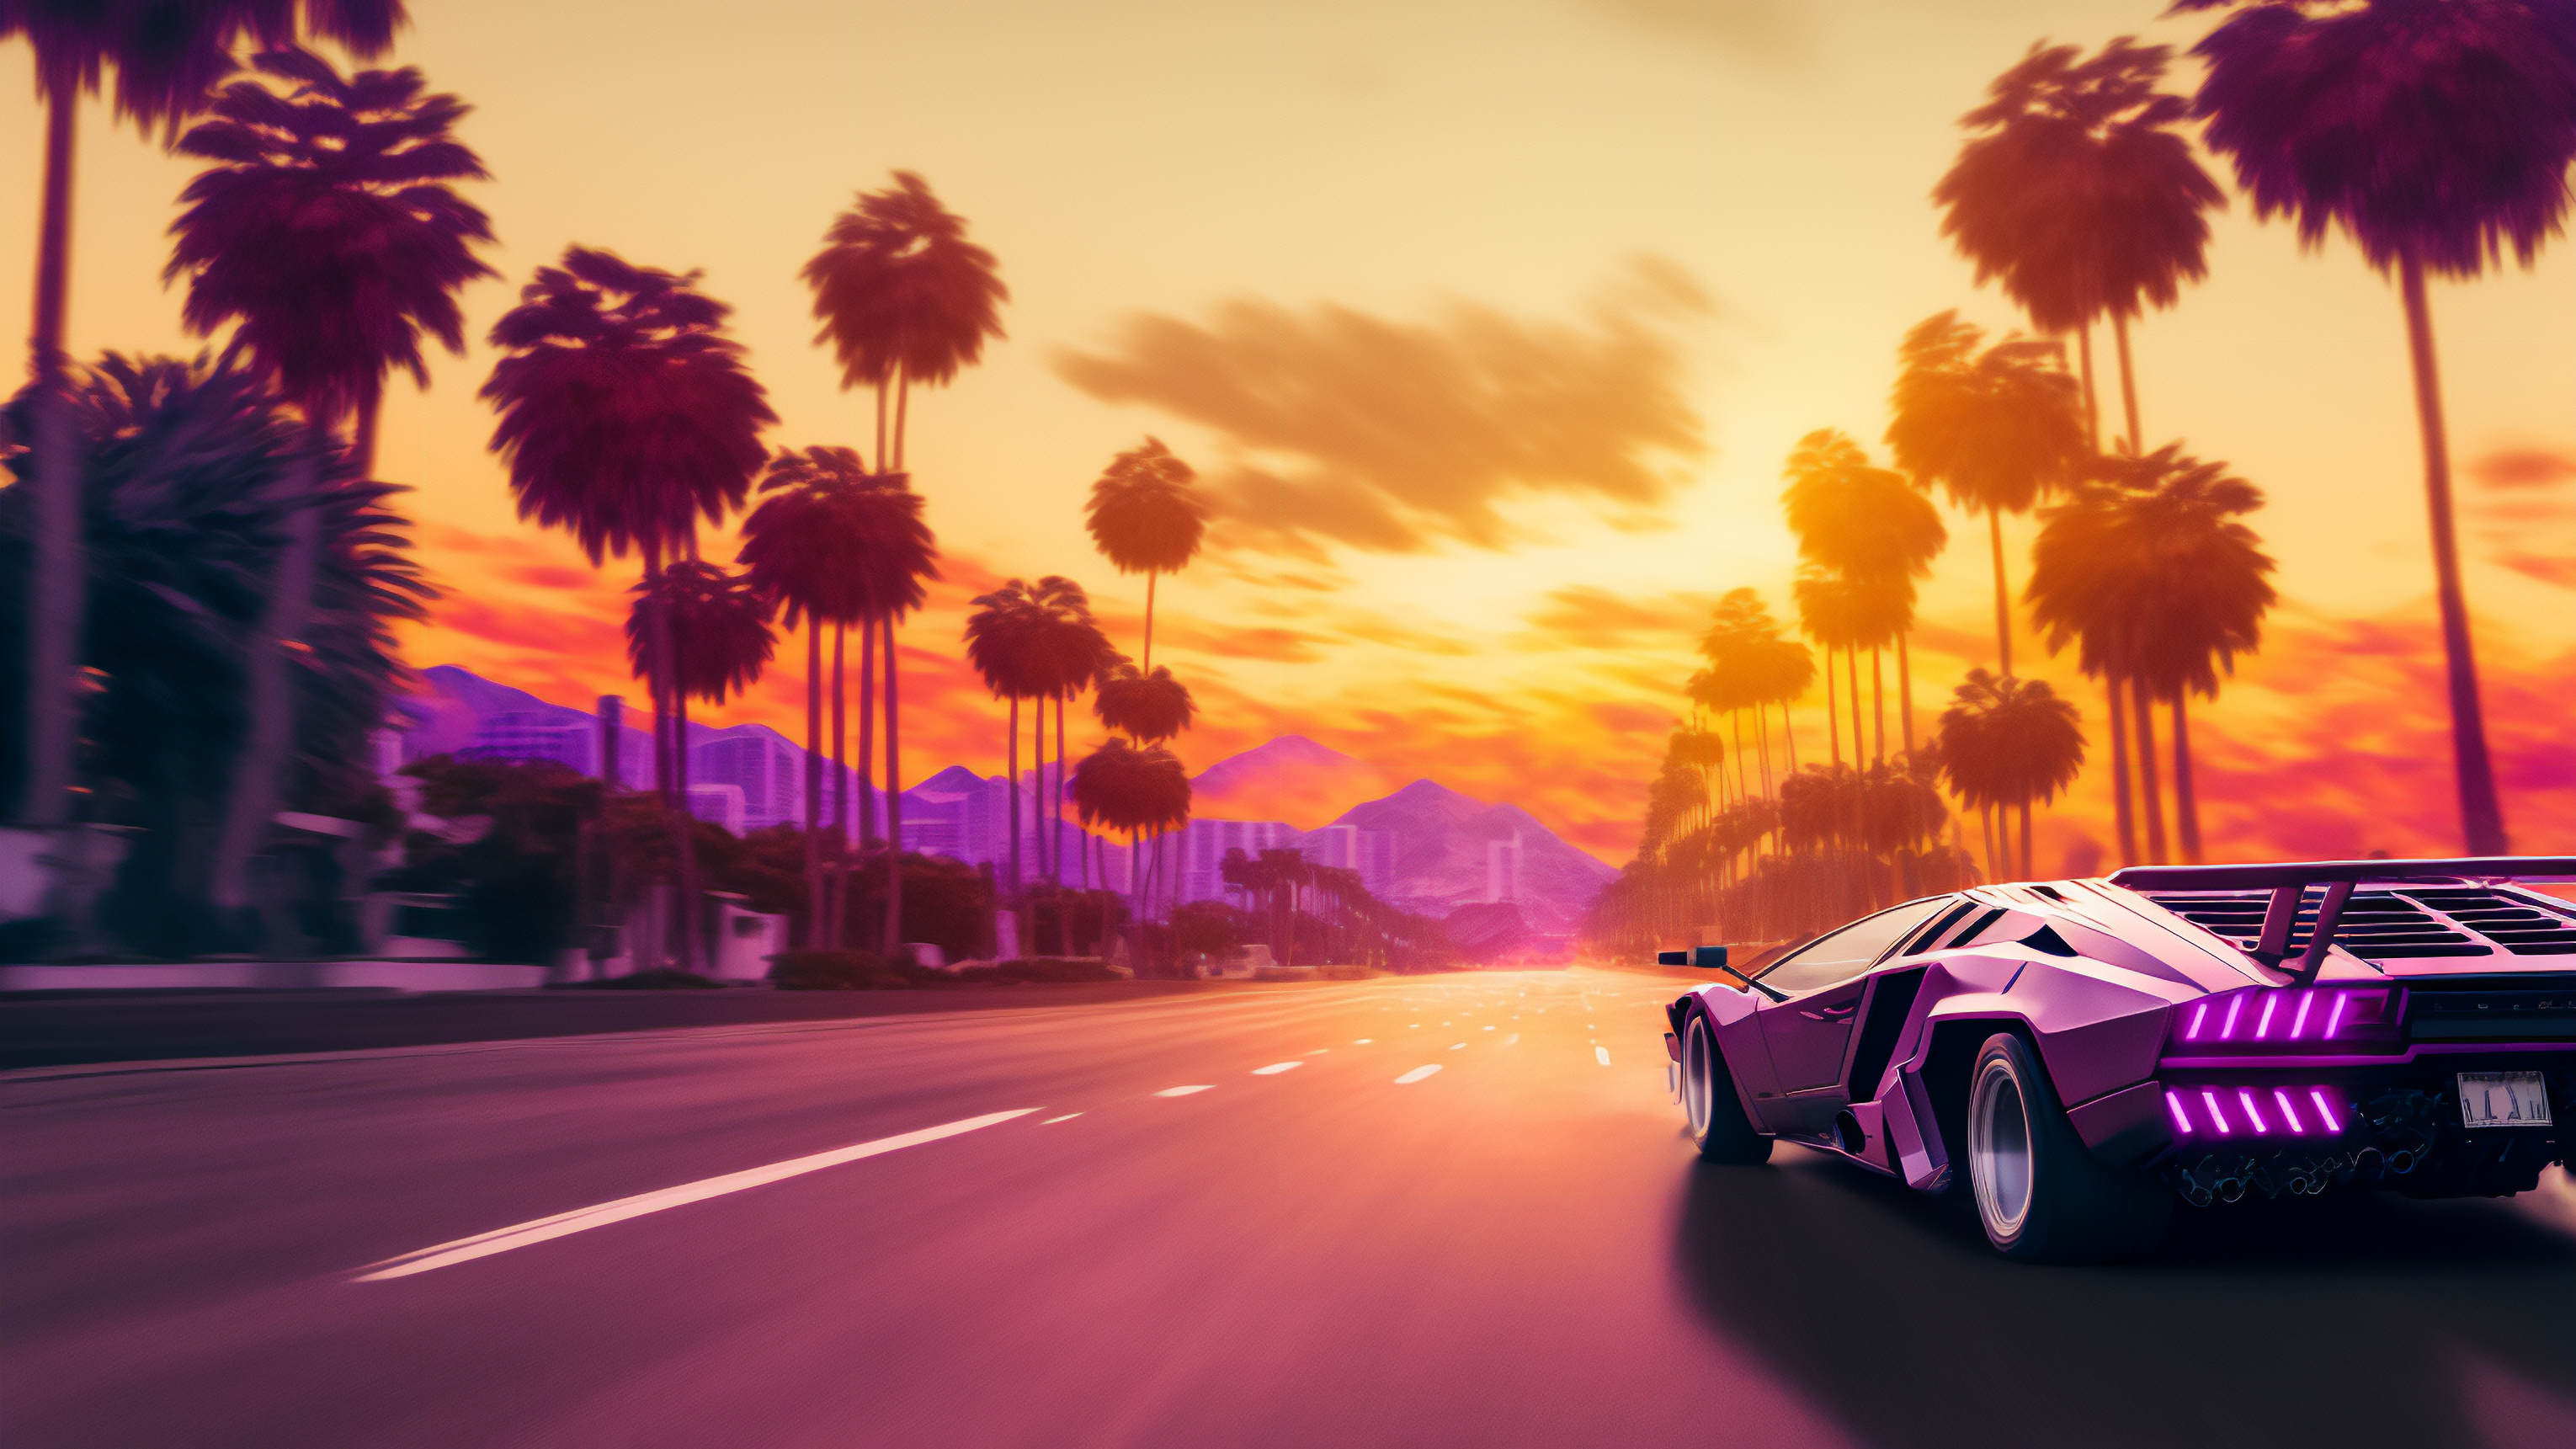 General 3060x1721 AI art sunset sports car Lamborghini synthwave palm trees road driving fantasy architecture sunset glow clouds taillights licence plates